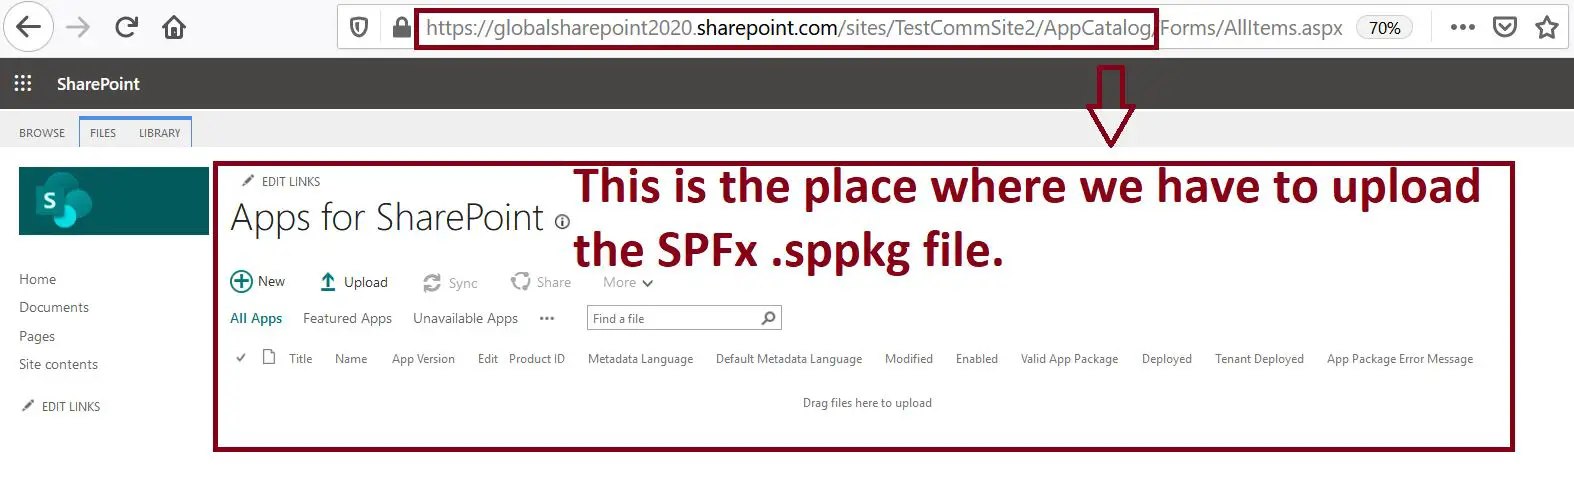 Apps for SharePoint library for SPFx SharePoint Online Site collection scope